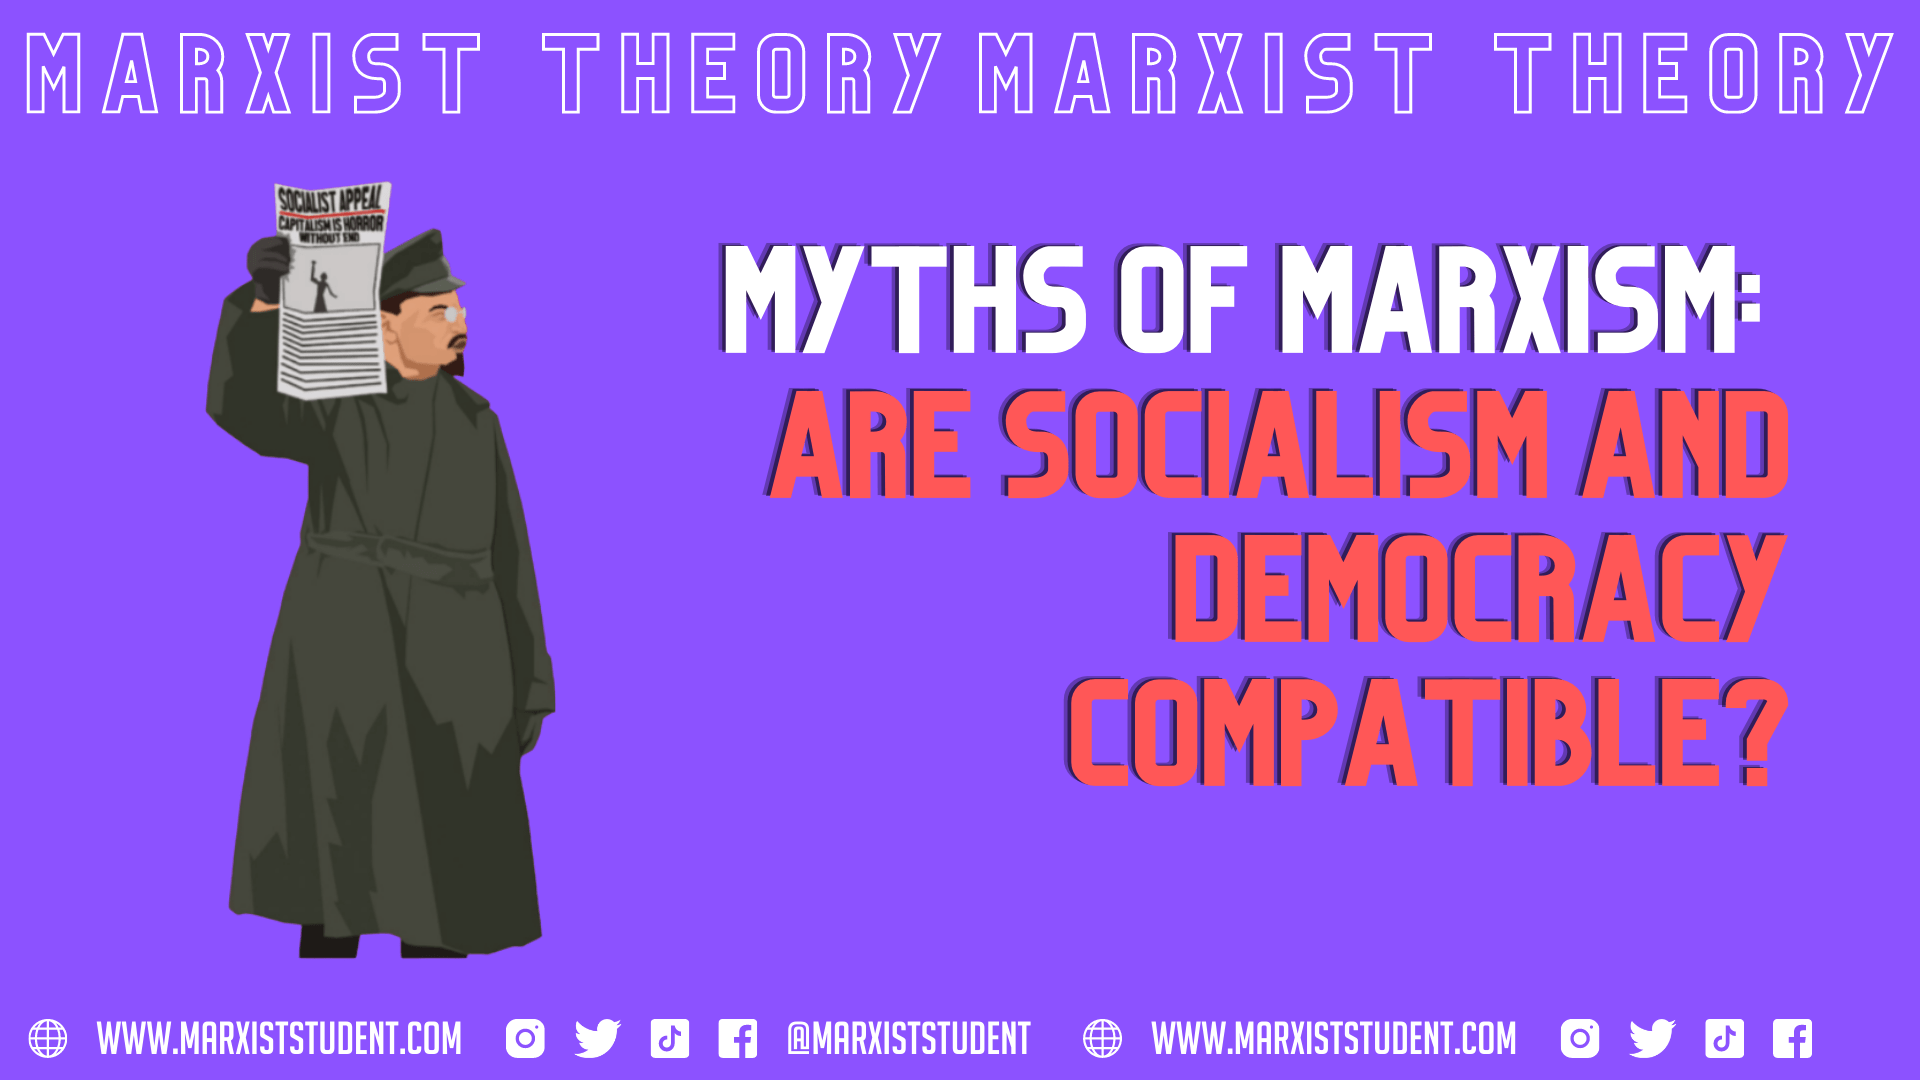 myths of marxism are socialism and democracy compatible